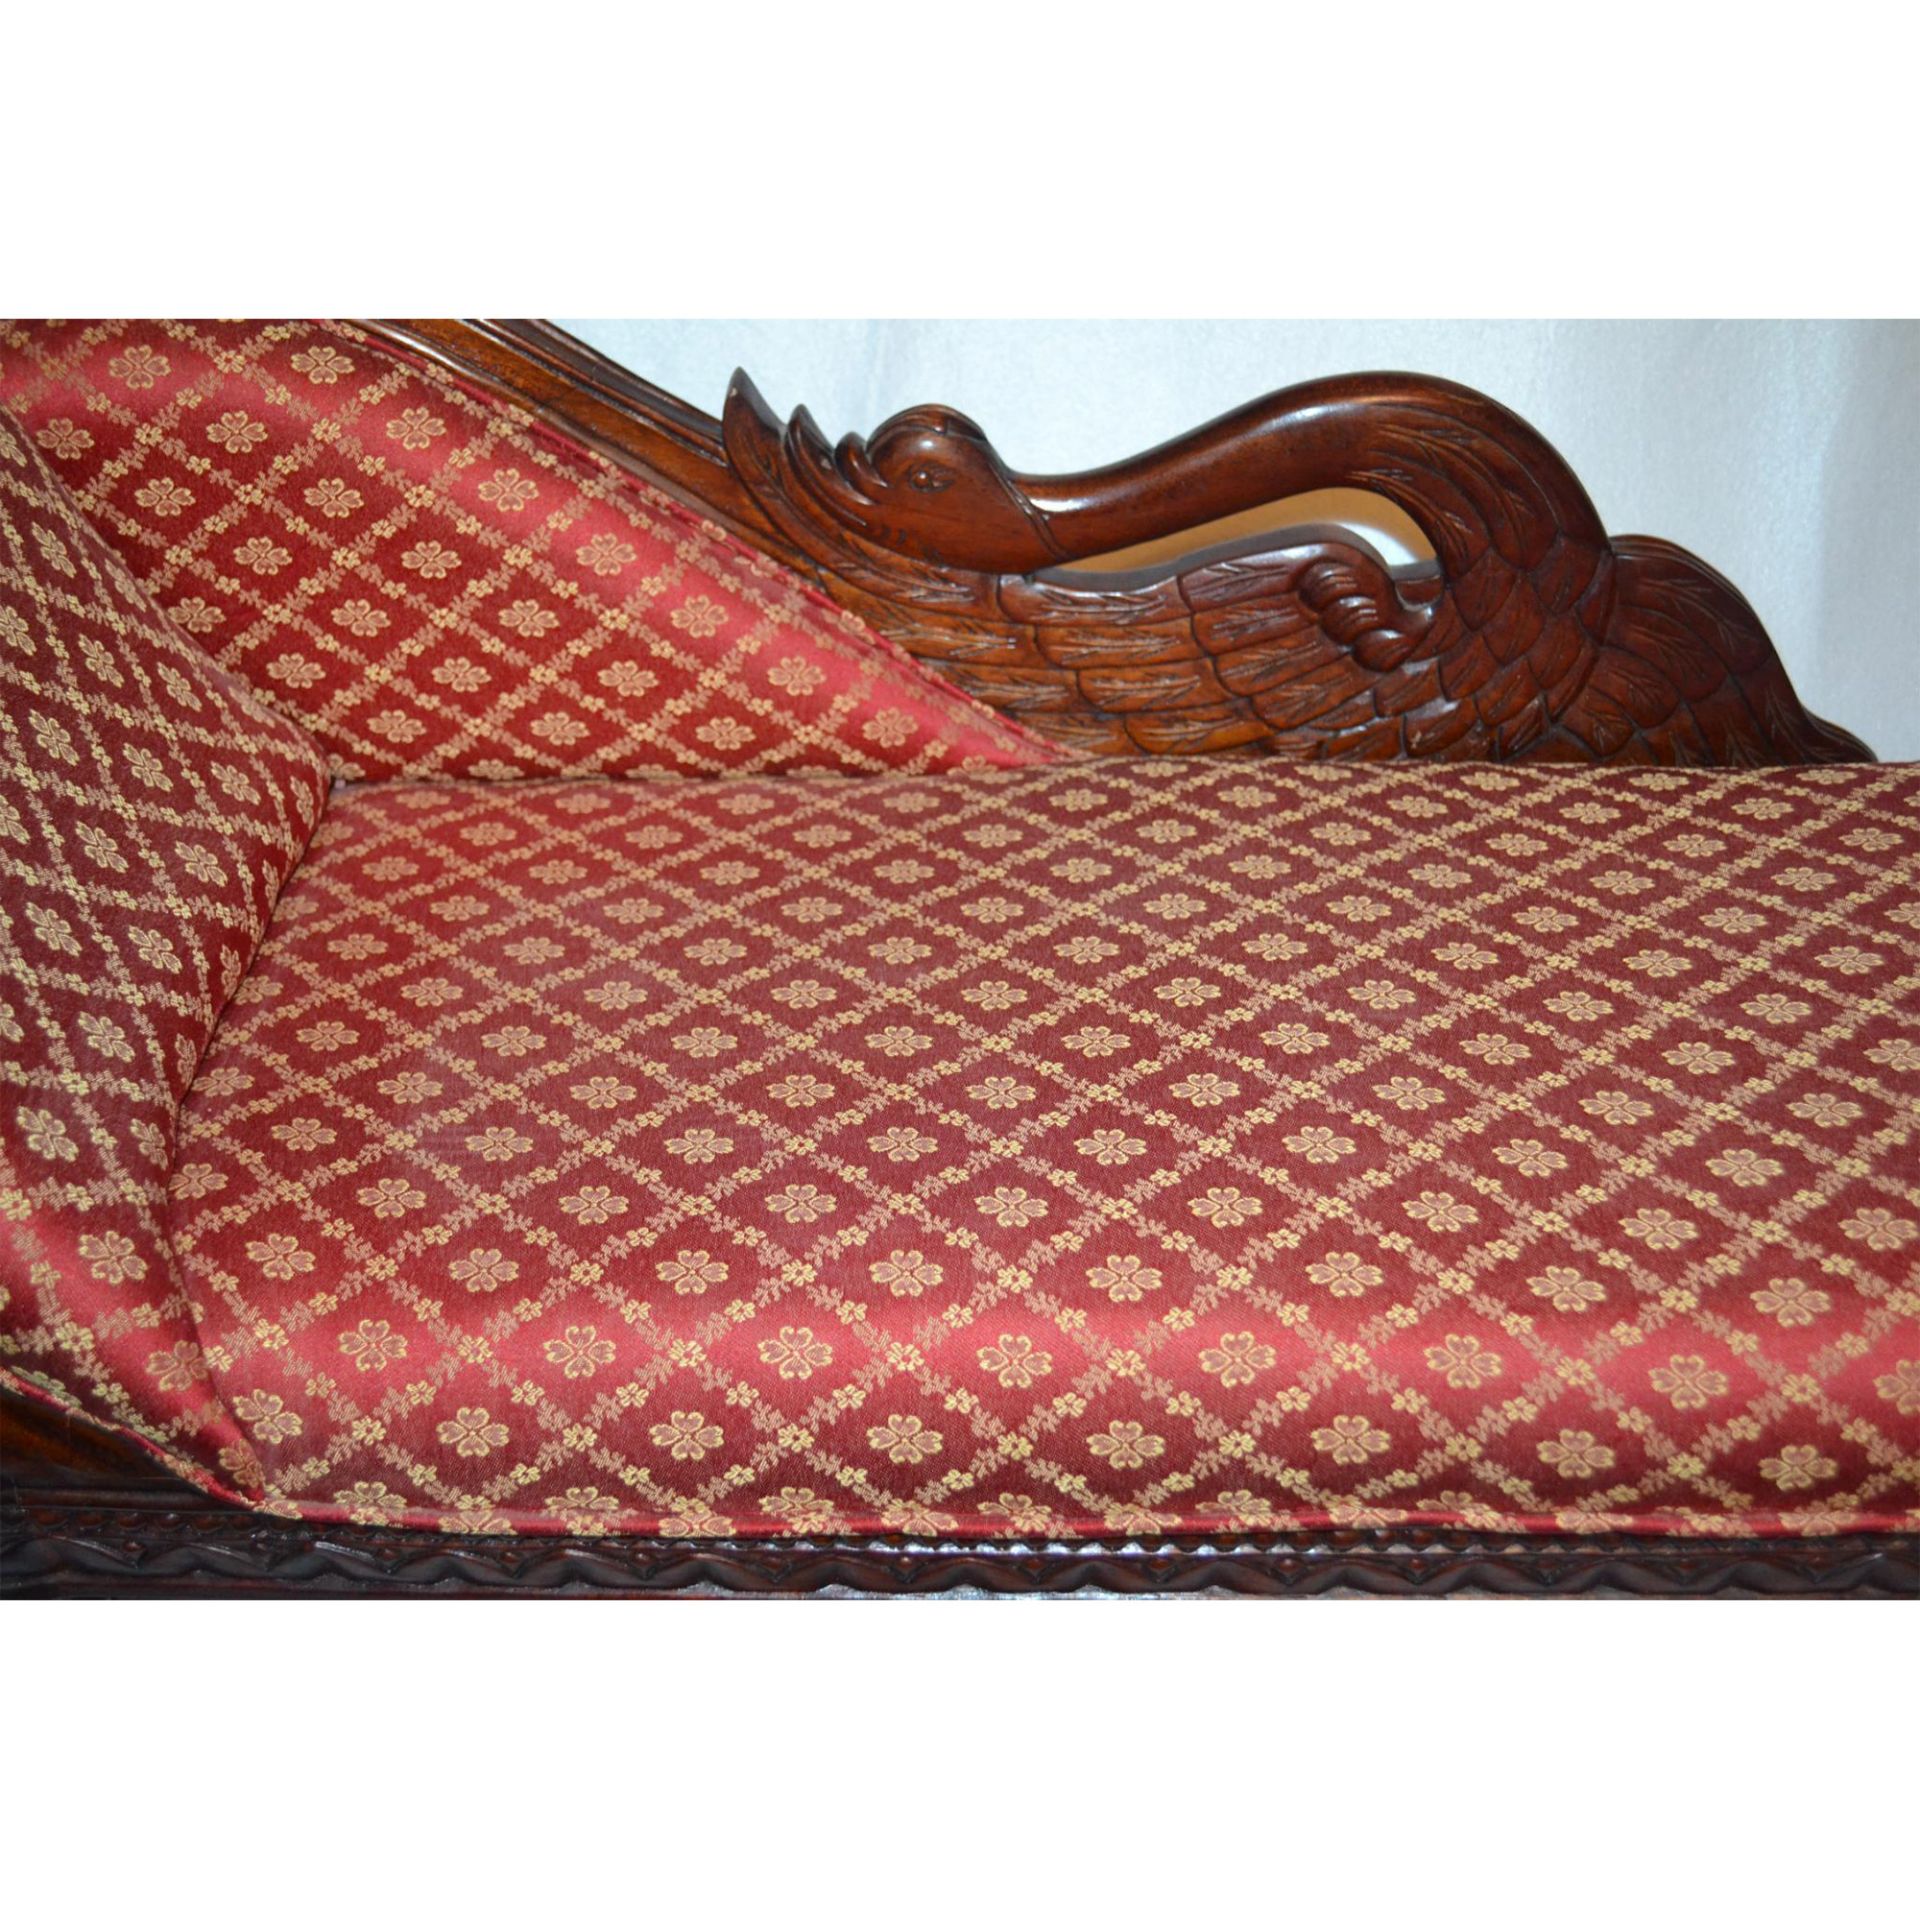 Miniature European Mahogany Hand Carved And Crafted Swan Sofa, Upholstered In Red/Gold Pattern Damas - Bild 3 aus 5